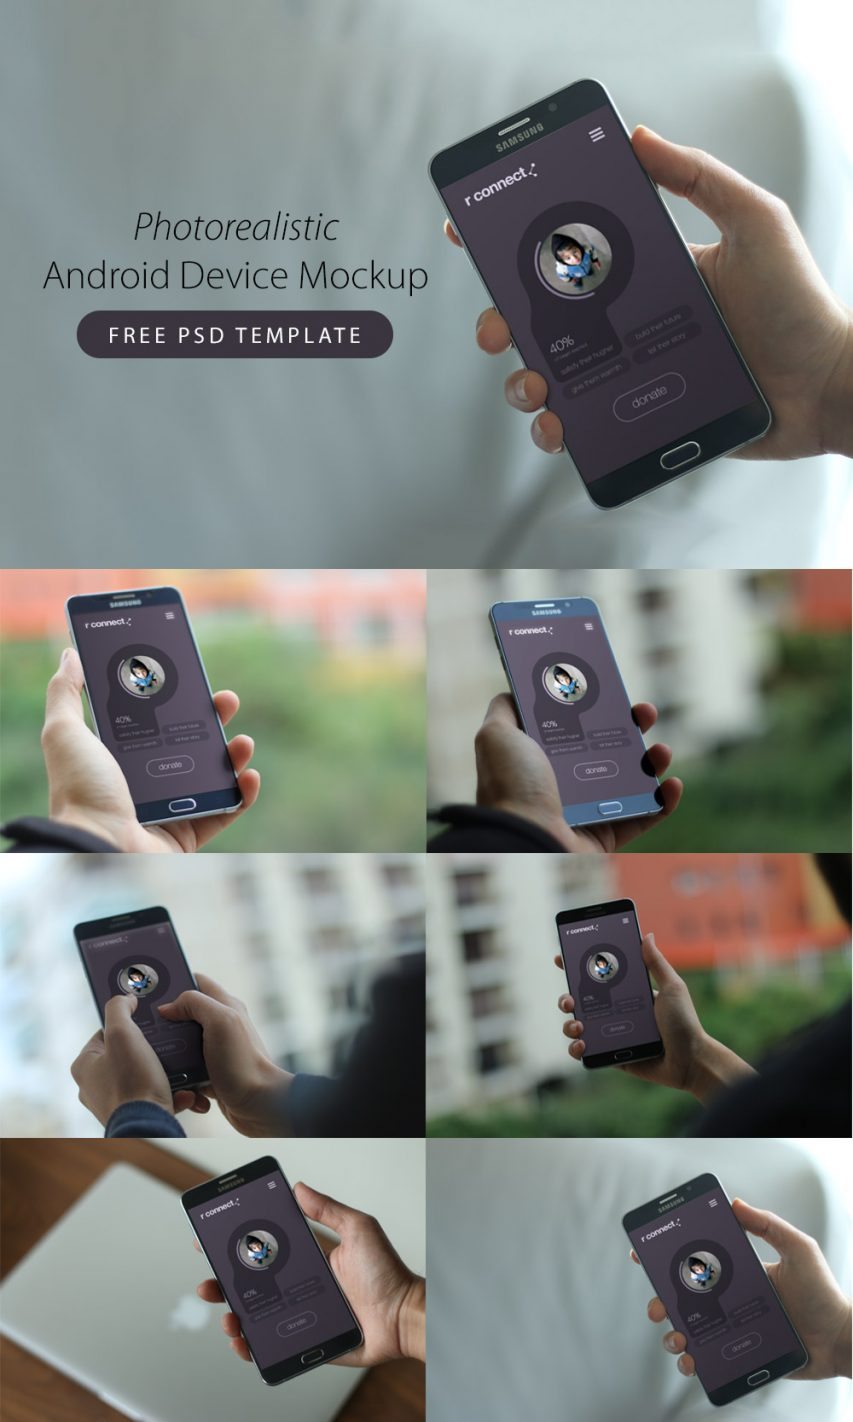 Photorealistic Android Device Mockup Free PSD Templates | Download Mockup